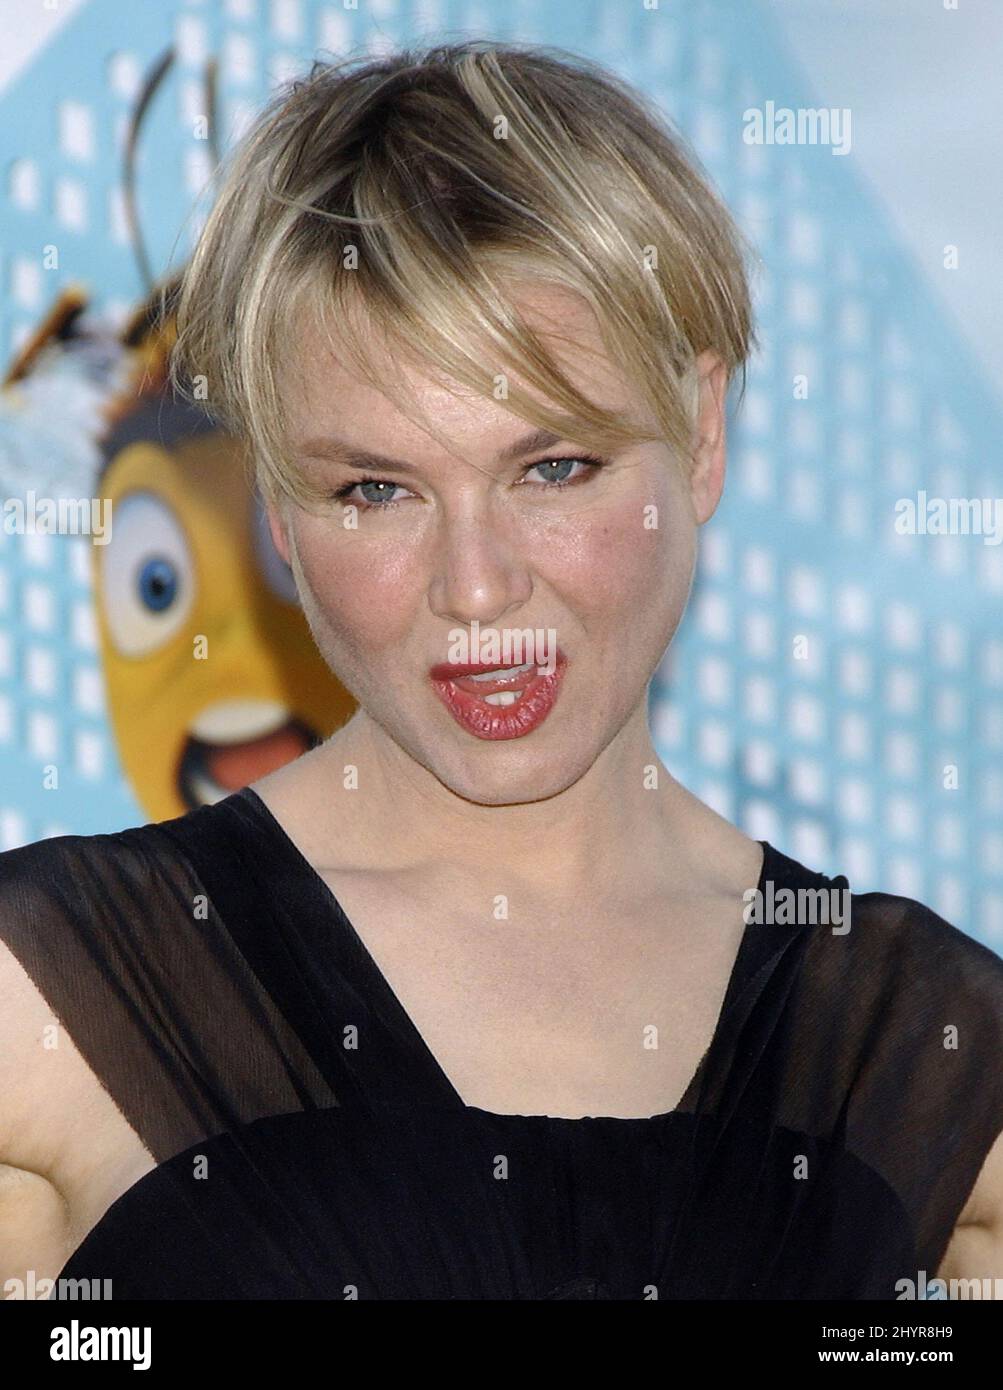 Renee Zellweger at the Los Angeles premiere of 'Bee Movie' at the Mann Village Theatre, Westwood, Los Angeles. Stock Photo